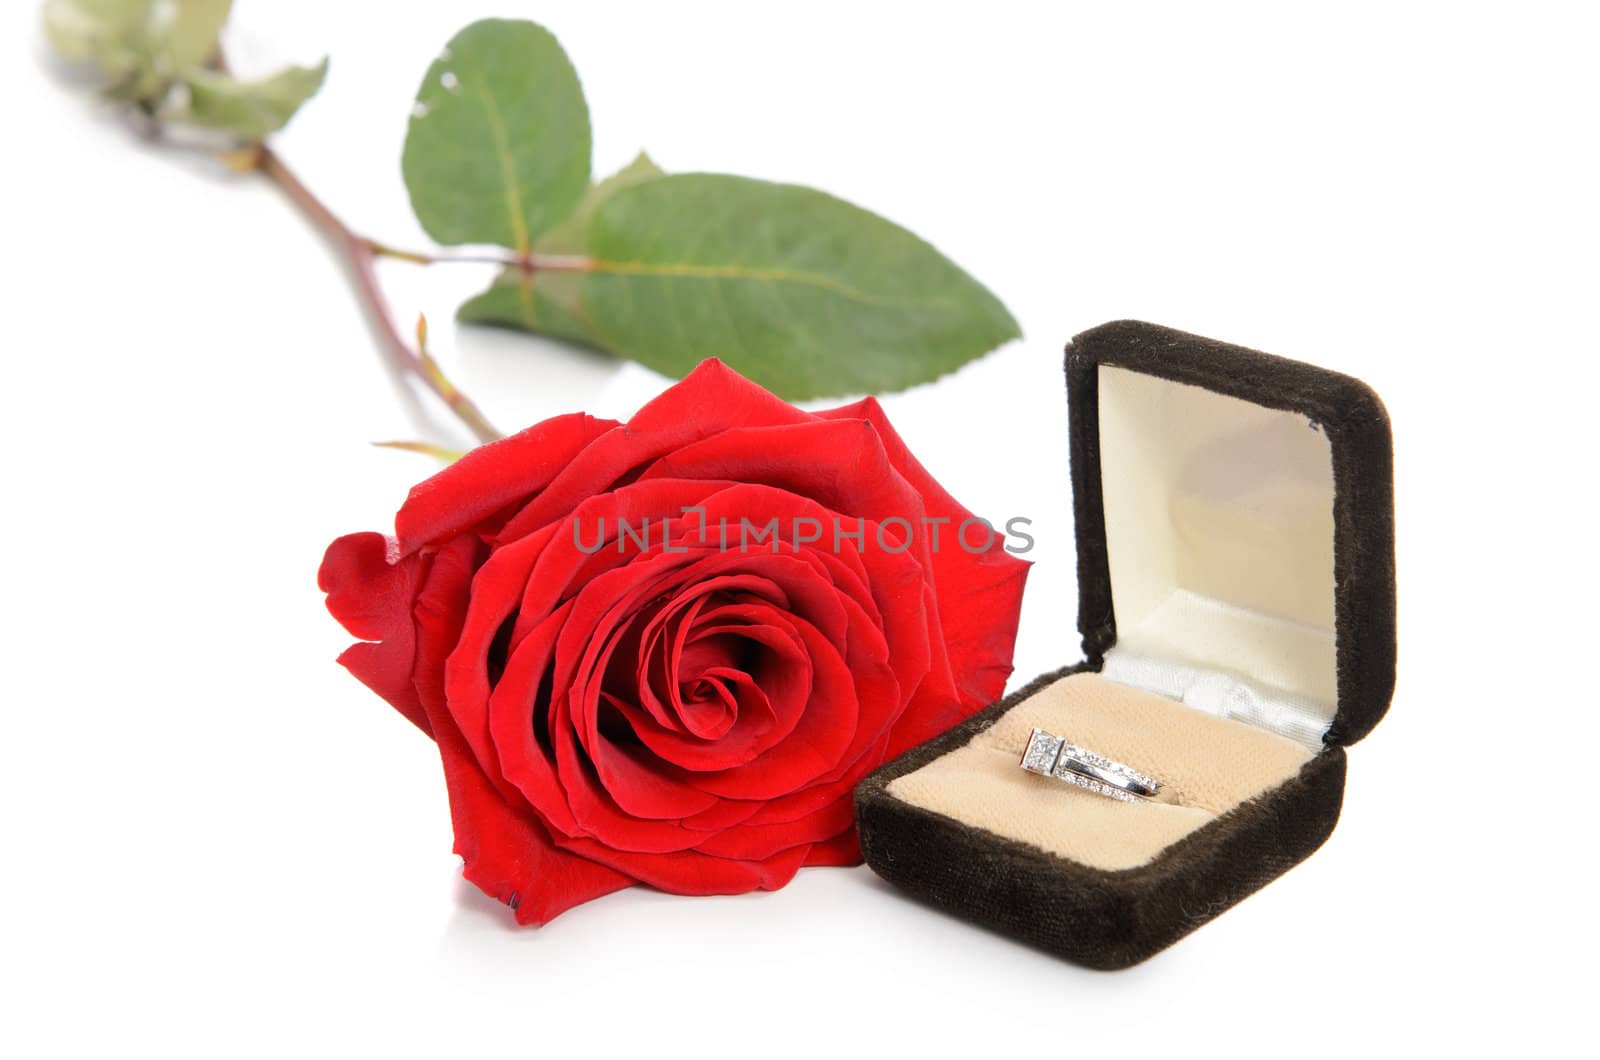 A diamond engagement ring in a jewellery box, shot next to a red rose, isolated against a white background.